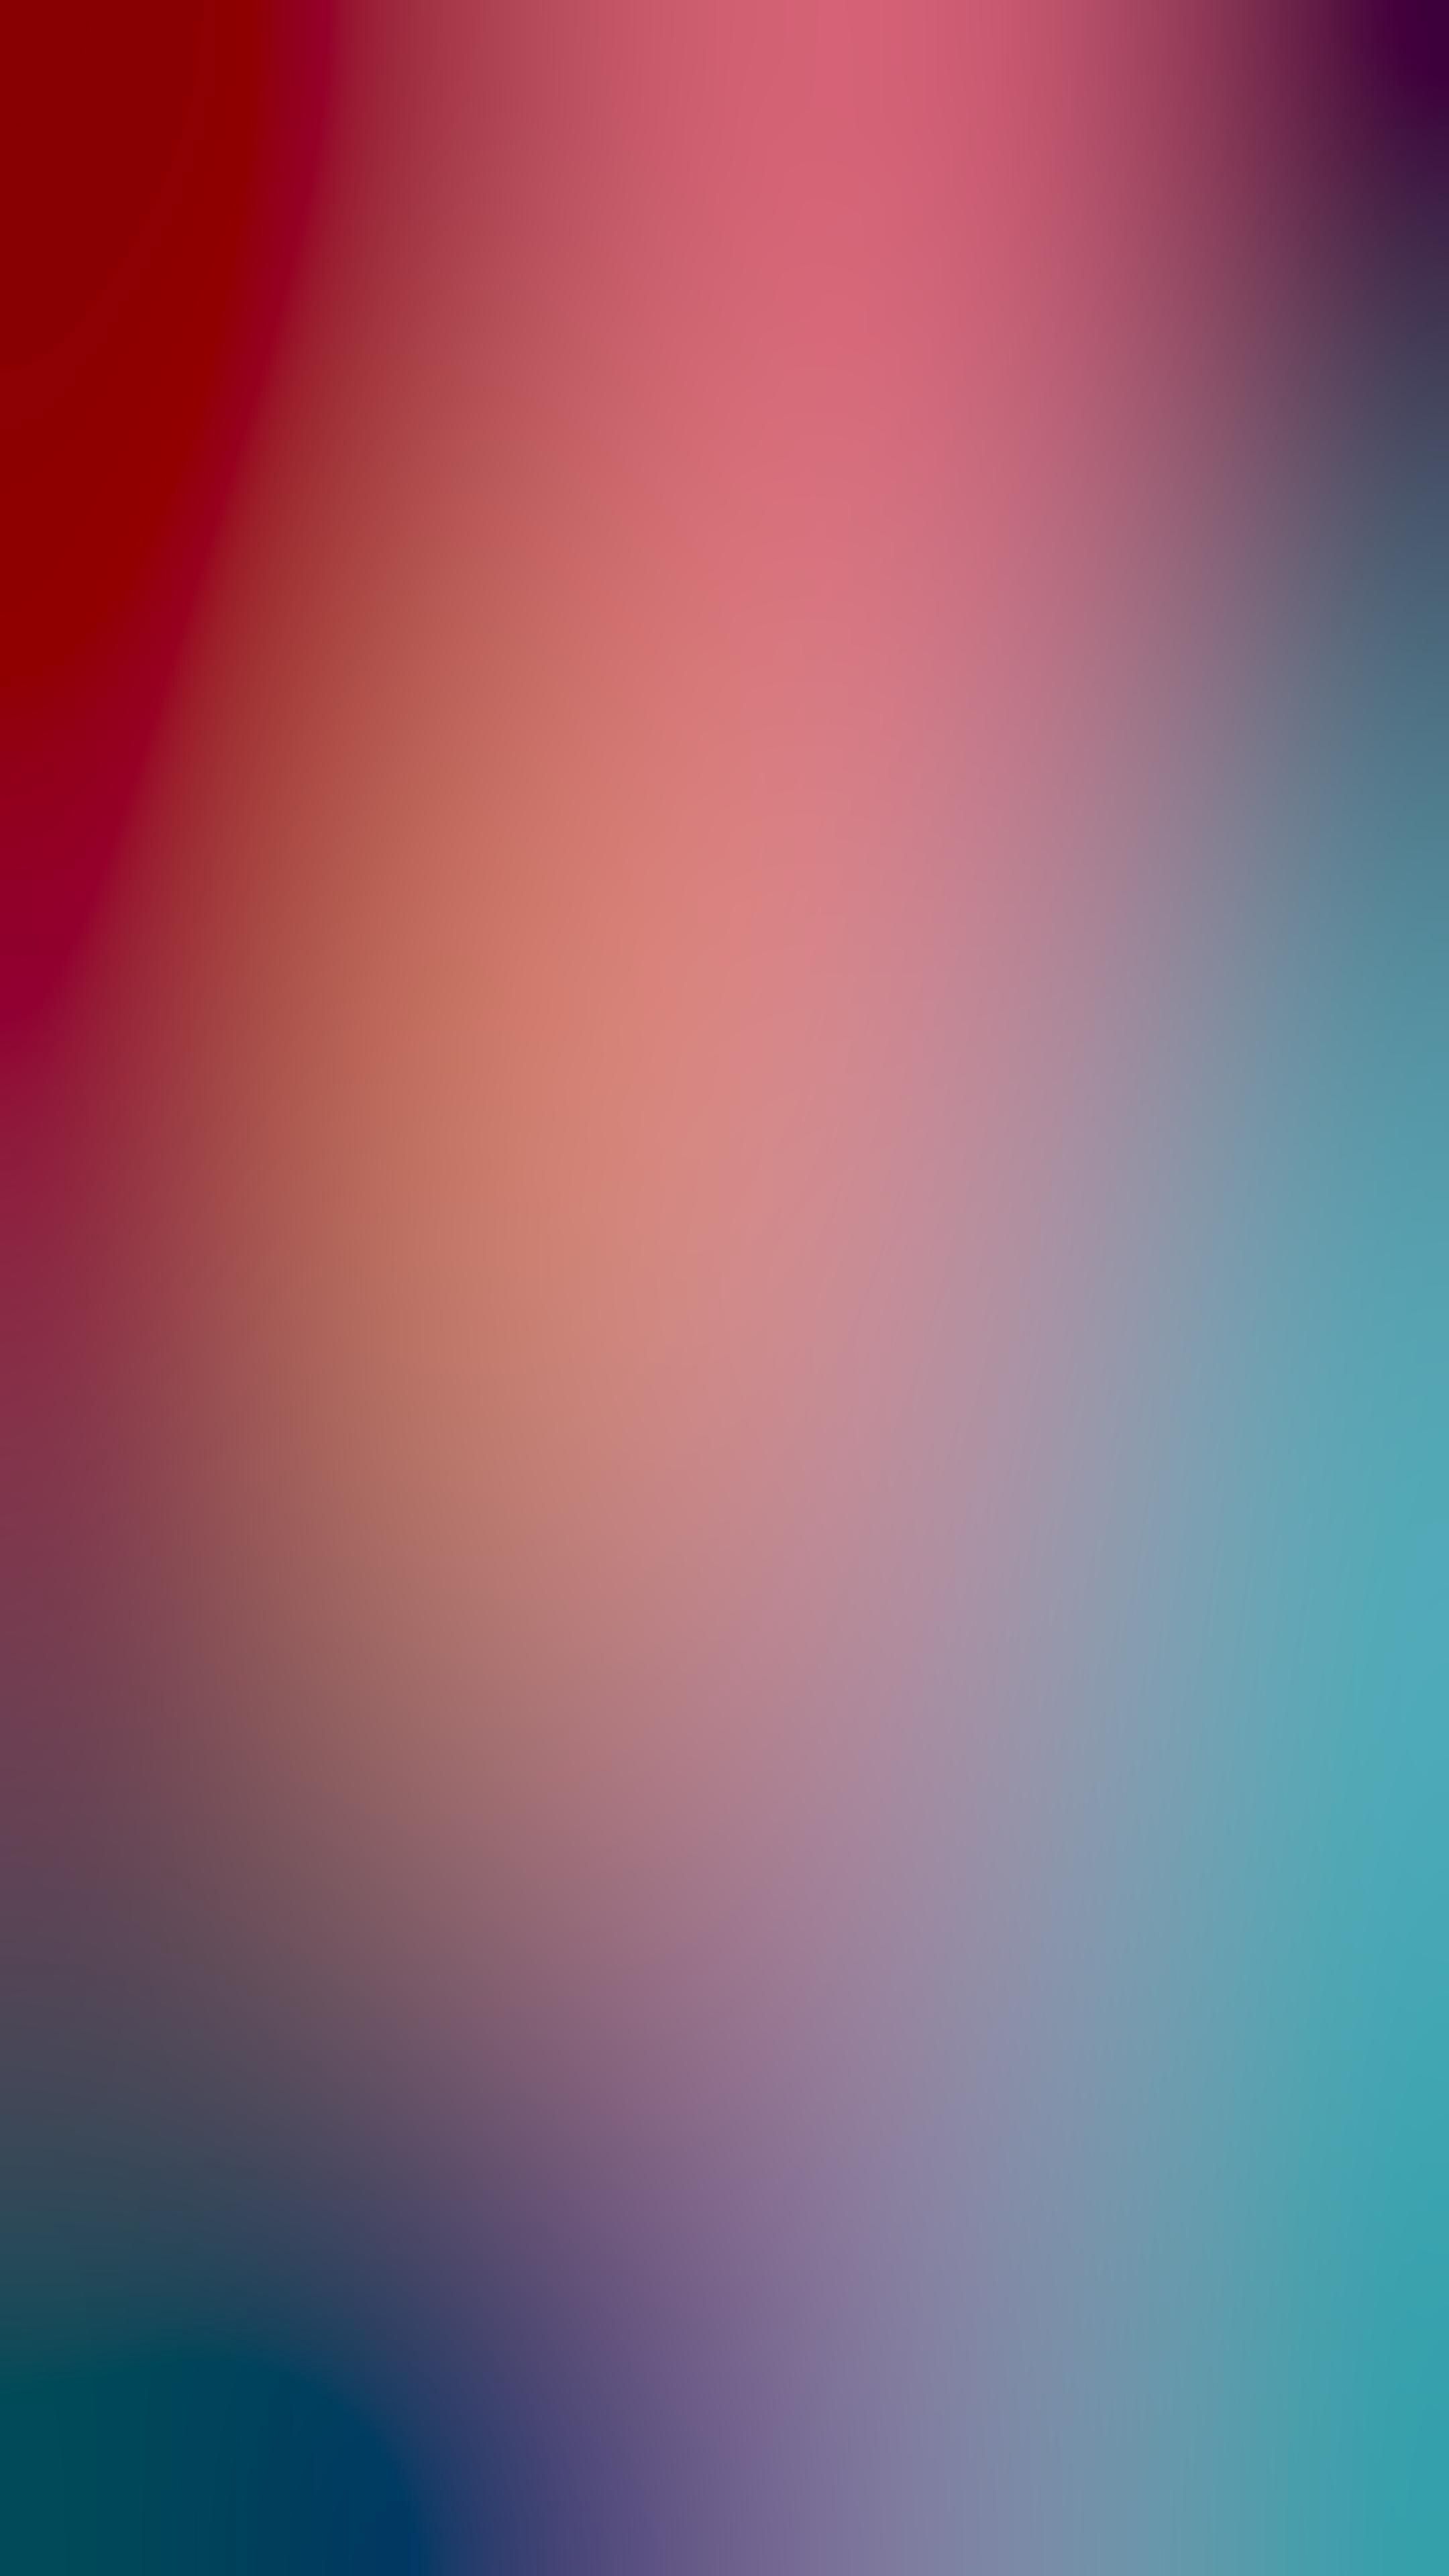 motley, gradient, abstract, multicolored, blur, smooth